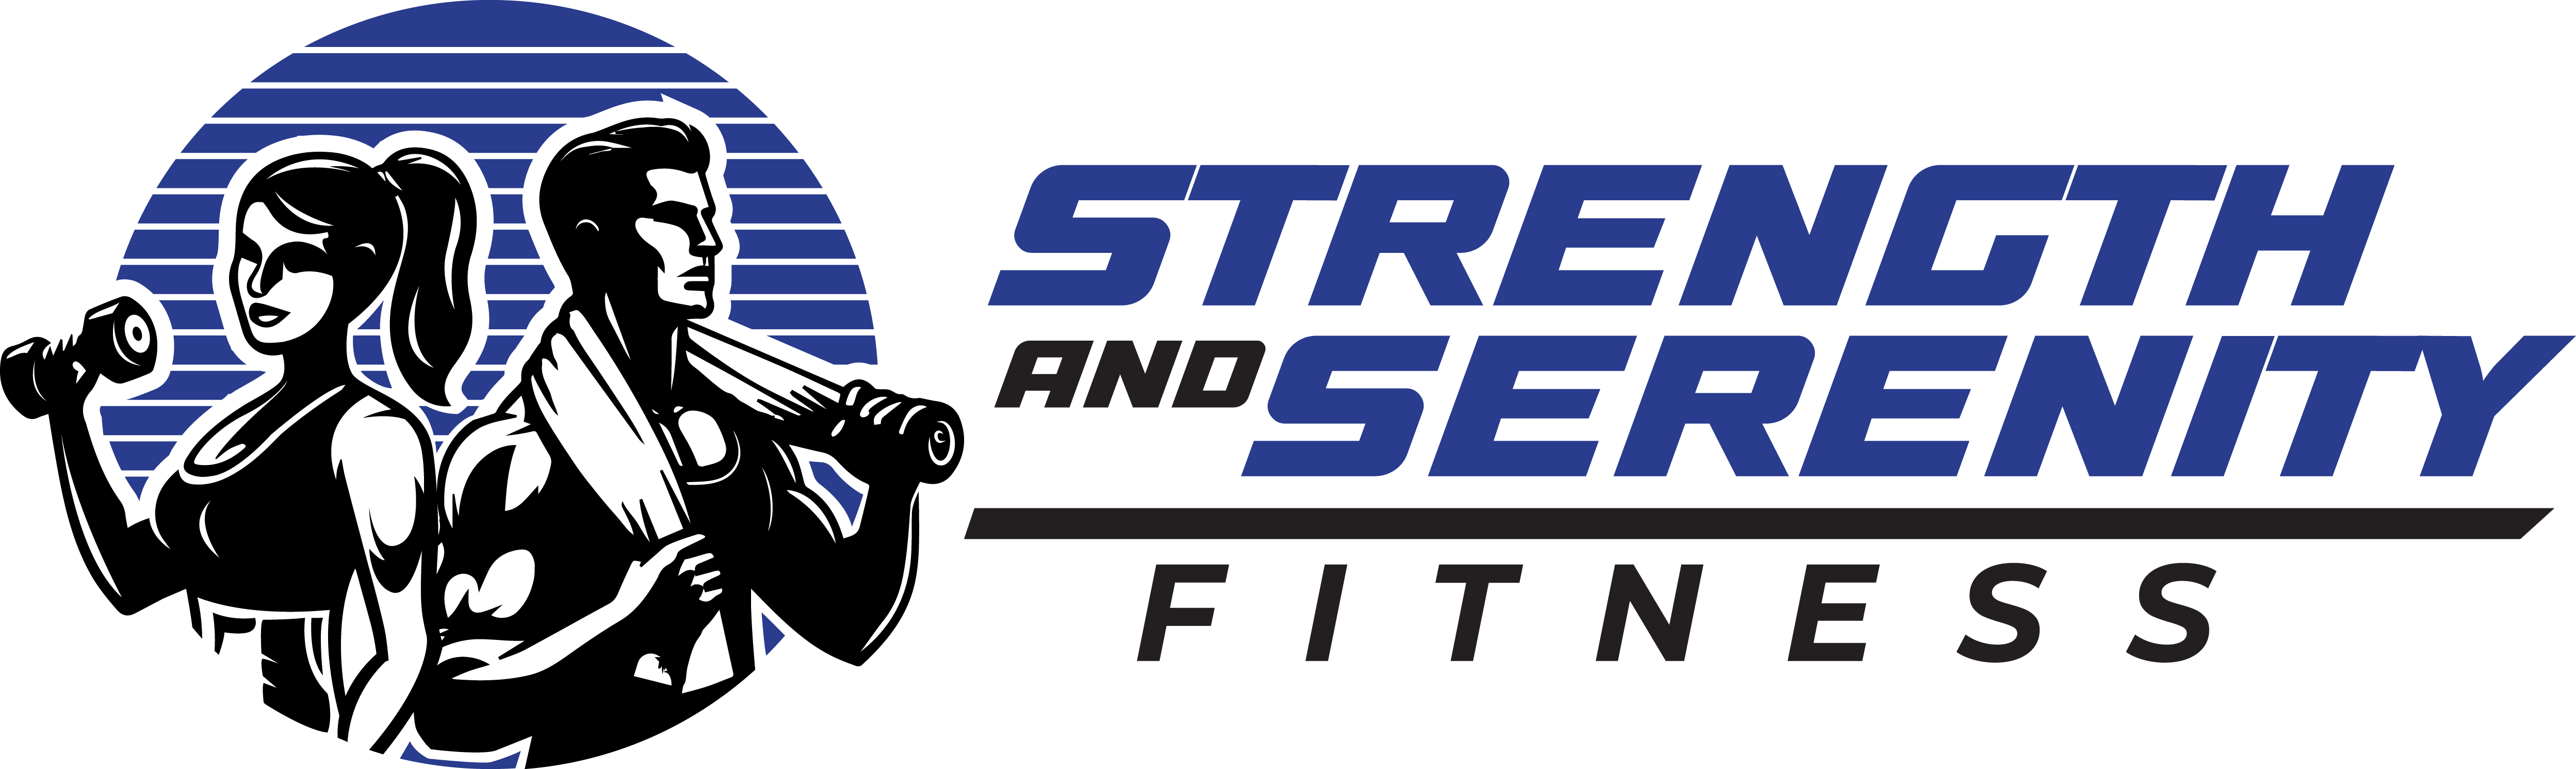 Strength and Serenity Fitness